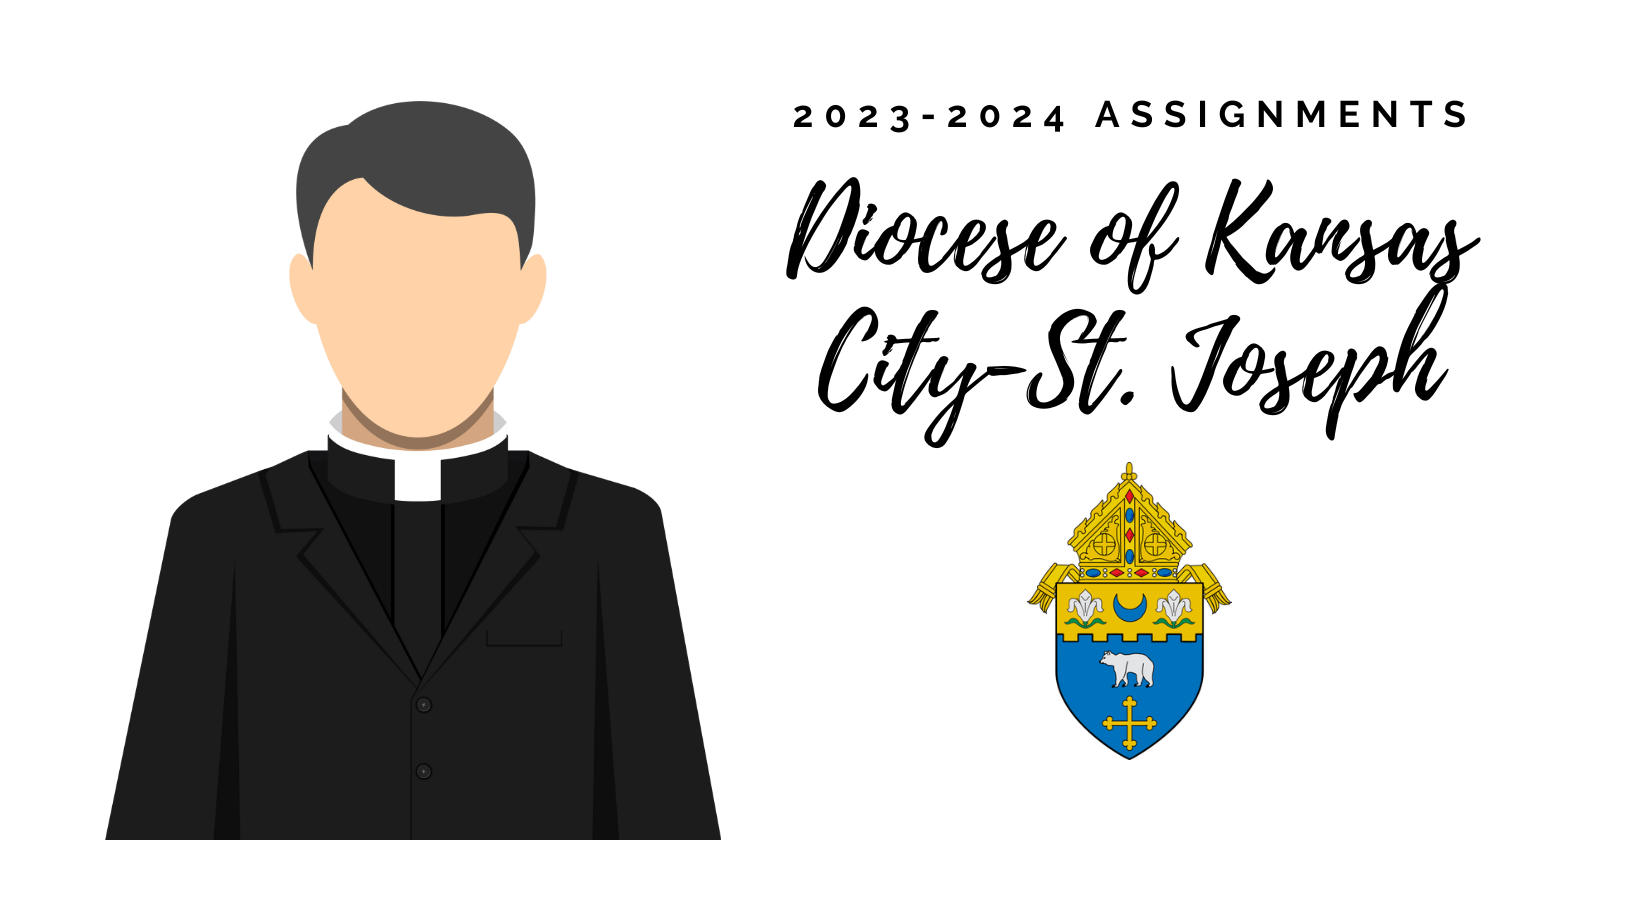 diocese of marquette priest assignments 2022